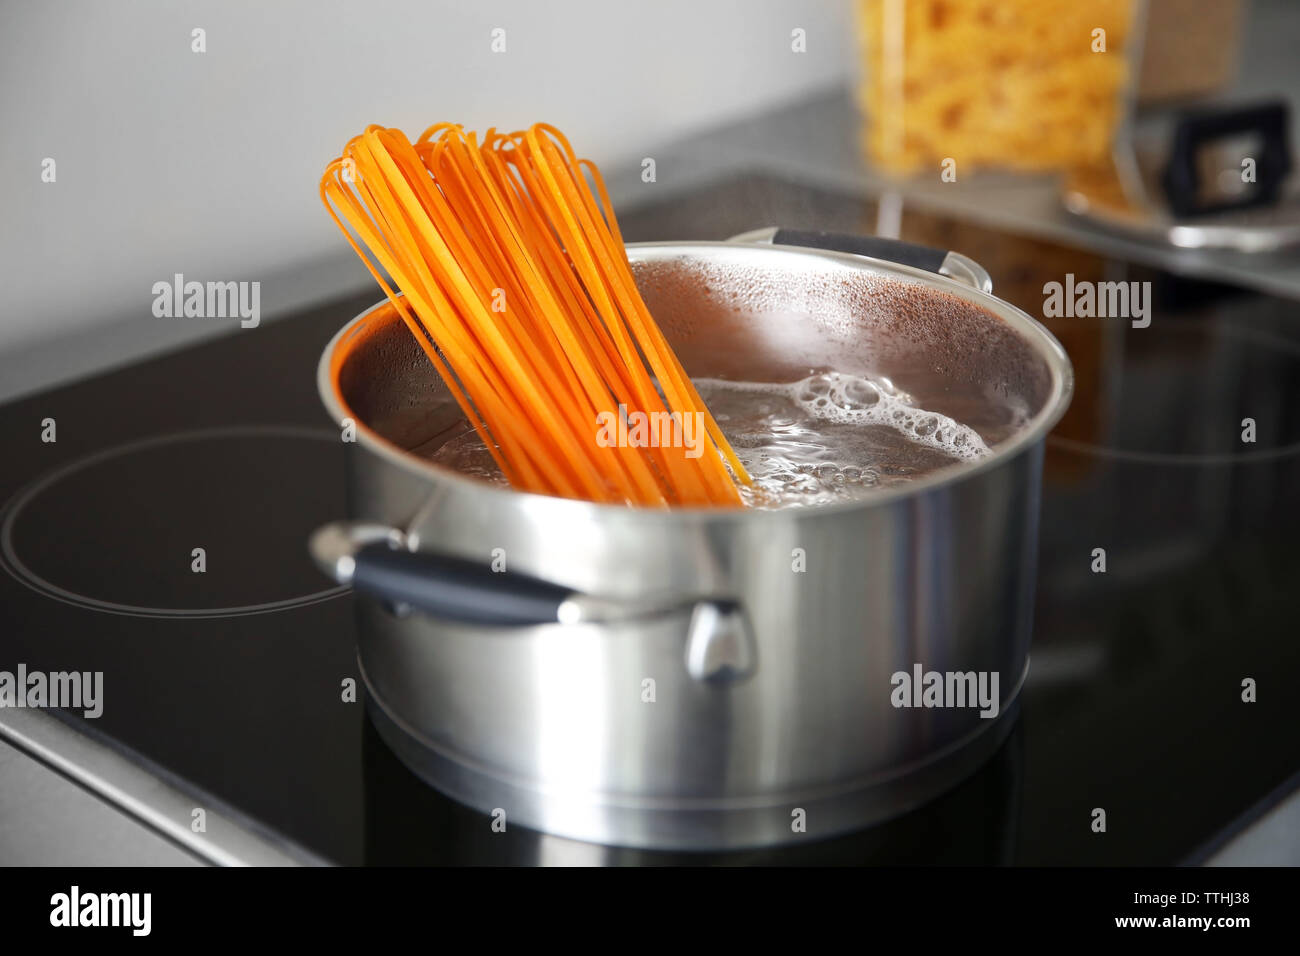 https://c8.alamy.com/comp/TTHJ38/boiling-pasta-in-pan-on-electric-stove-in-the-kitchen-TTHJ38.jpg